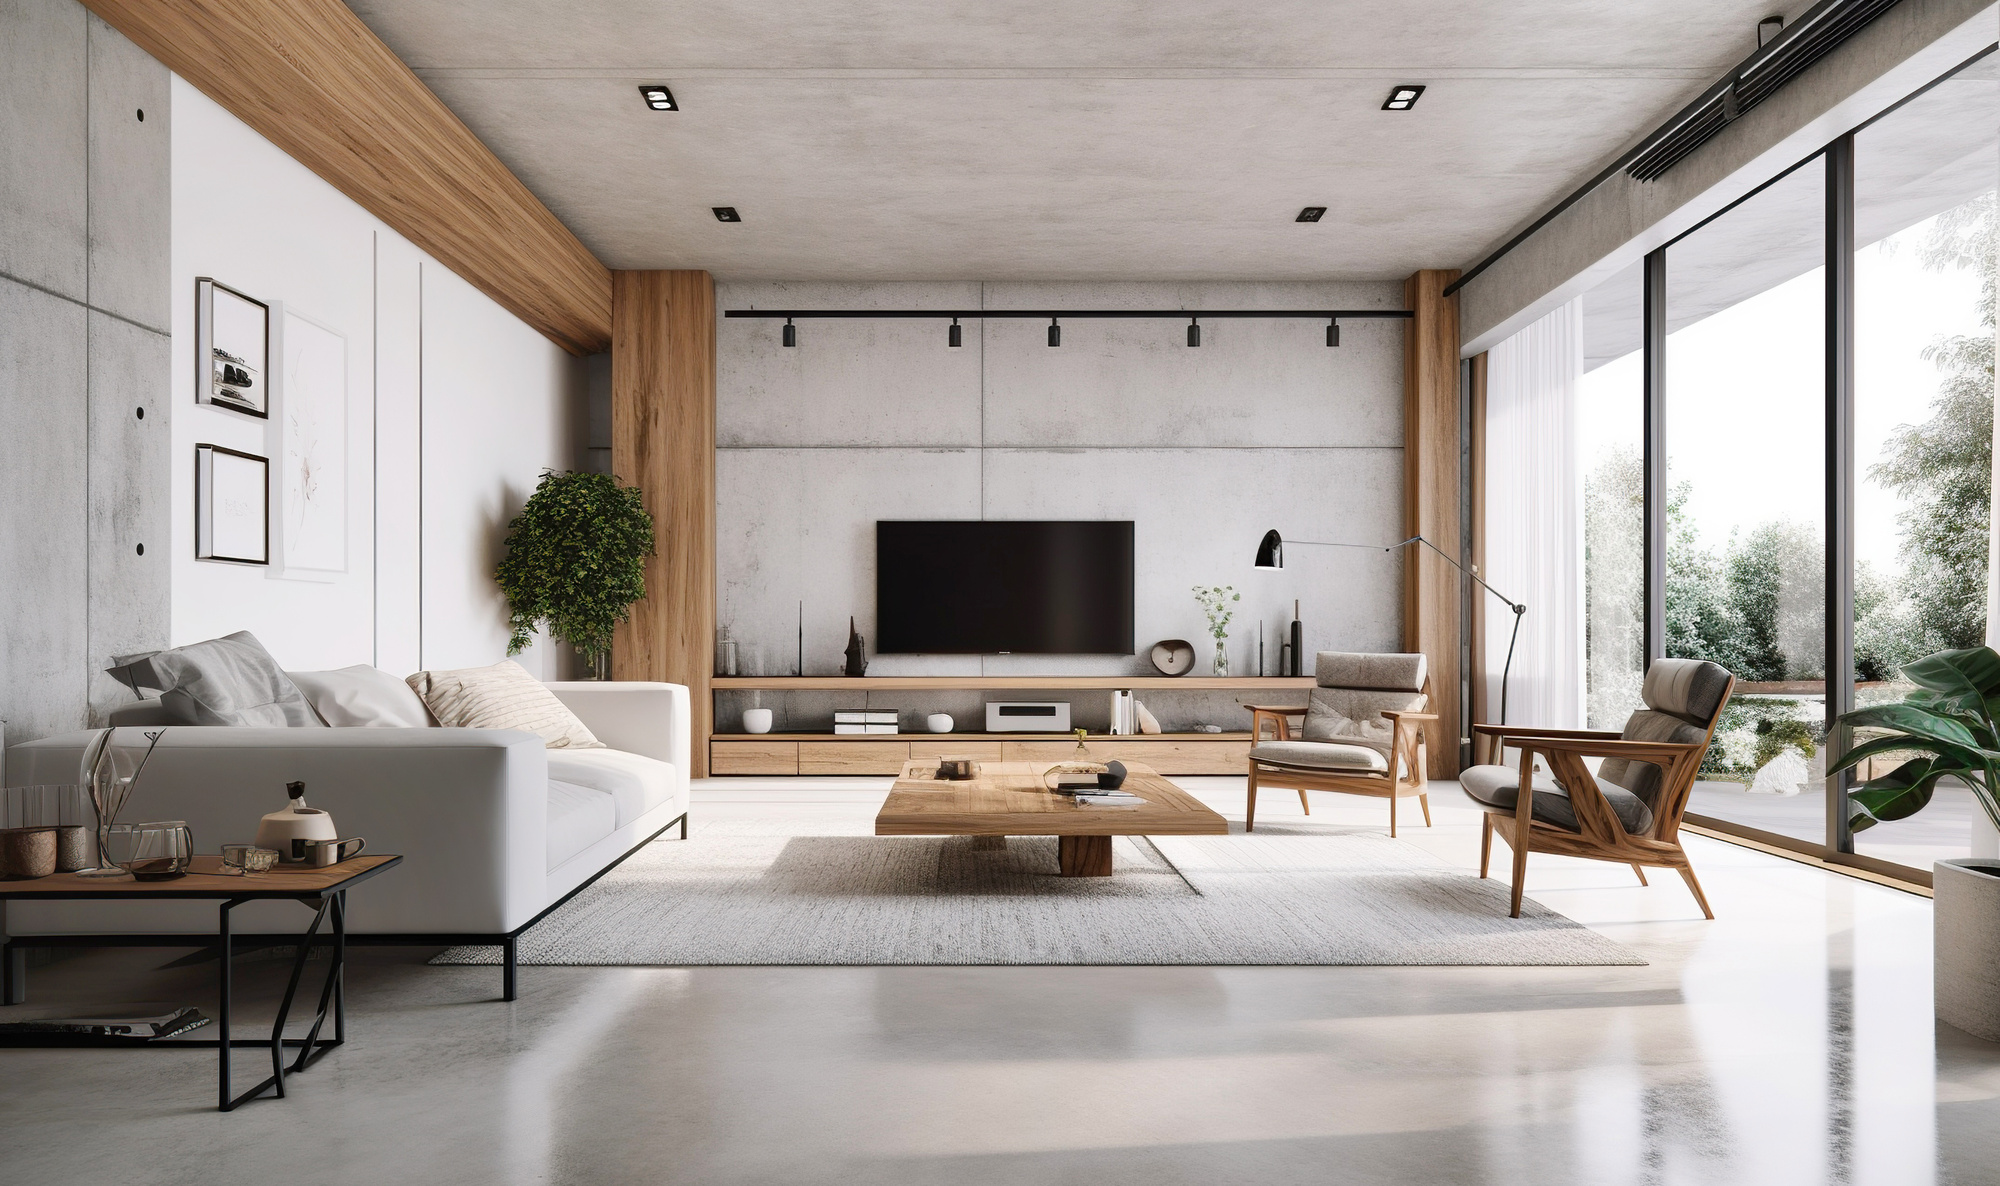 Loft interior design of modern living room with tv. Created with generative AI technology.